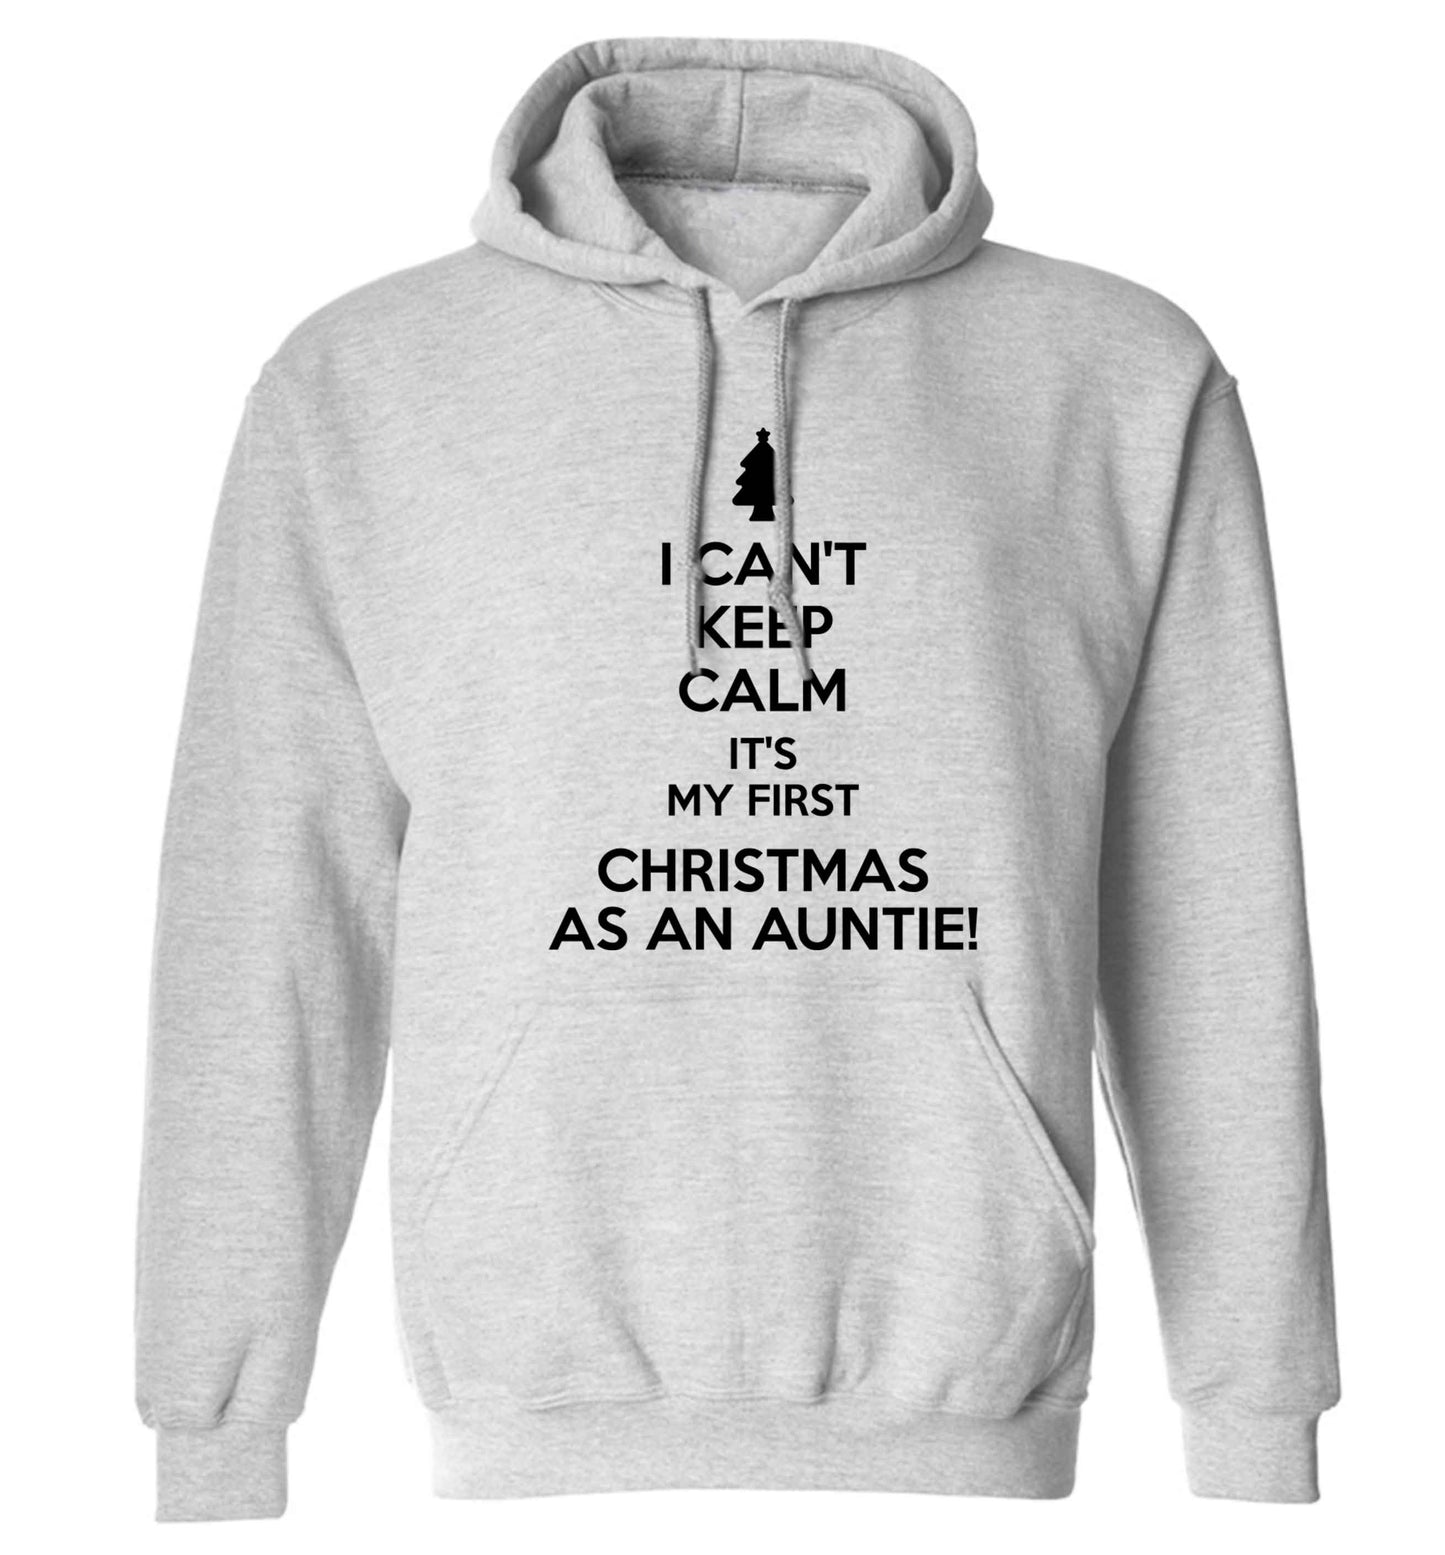 I can't keep calm it's my first Christmas as an auntie! adults unisex grey hoodie 2XL